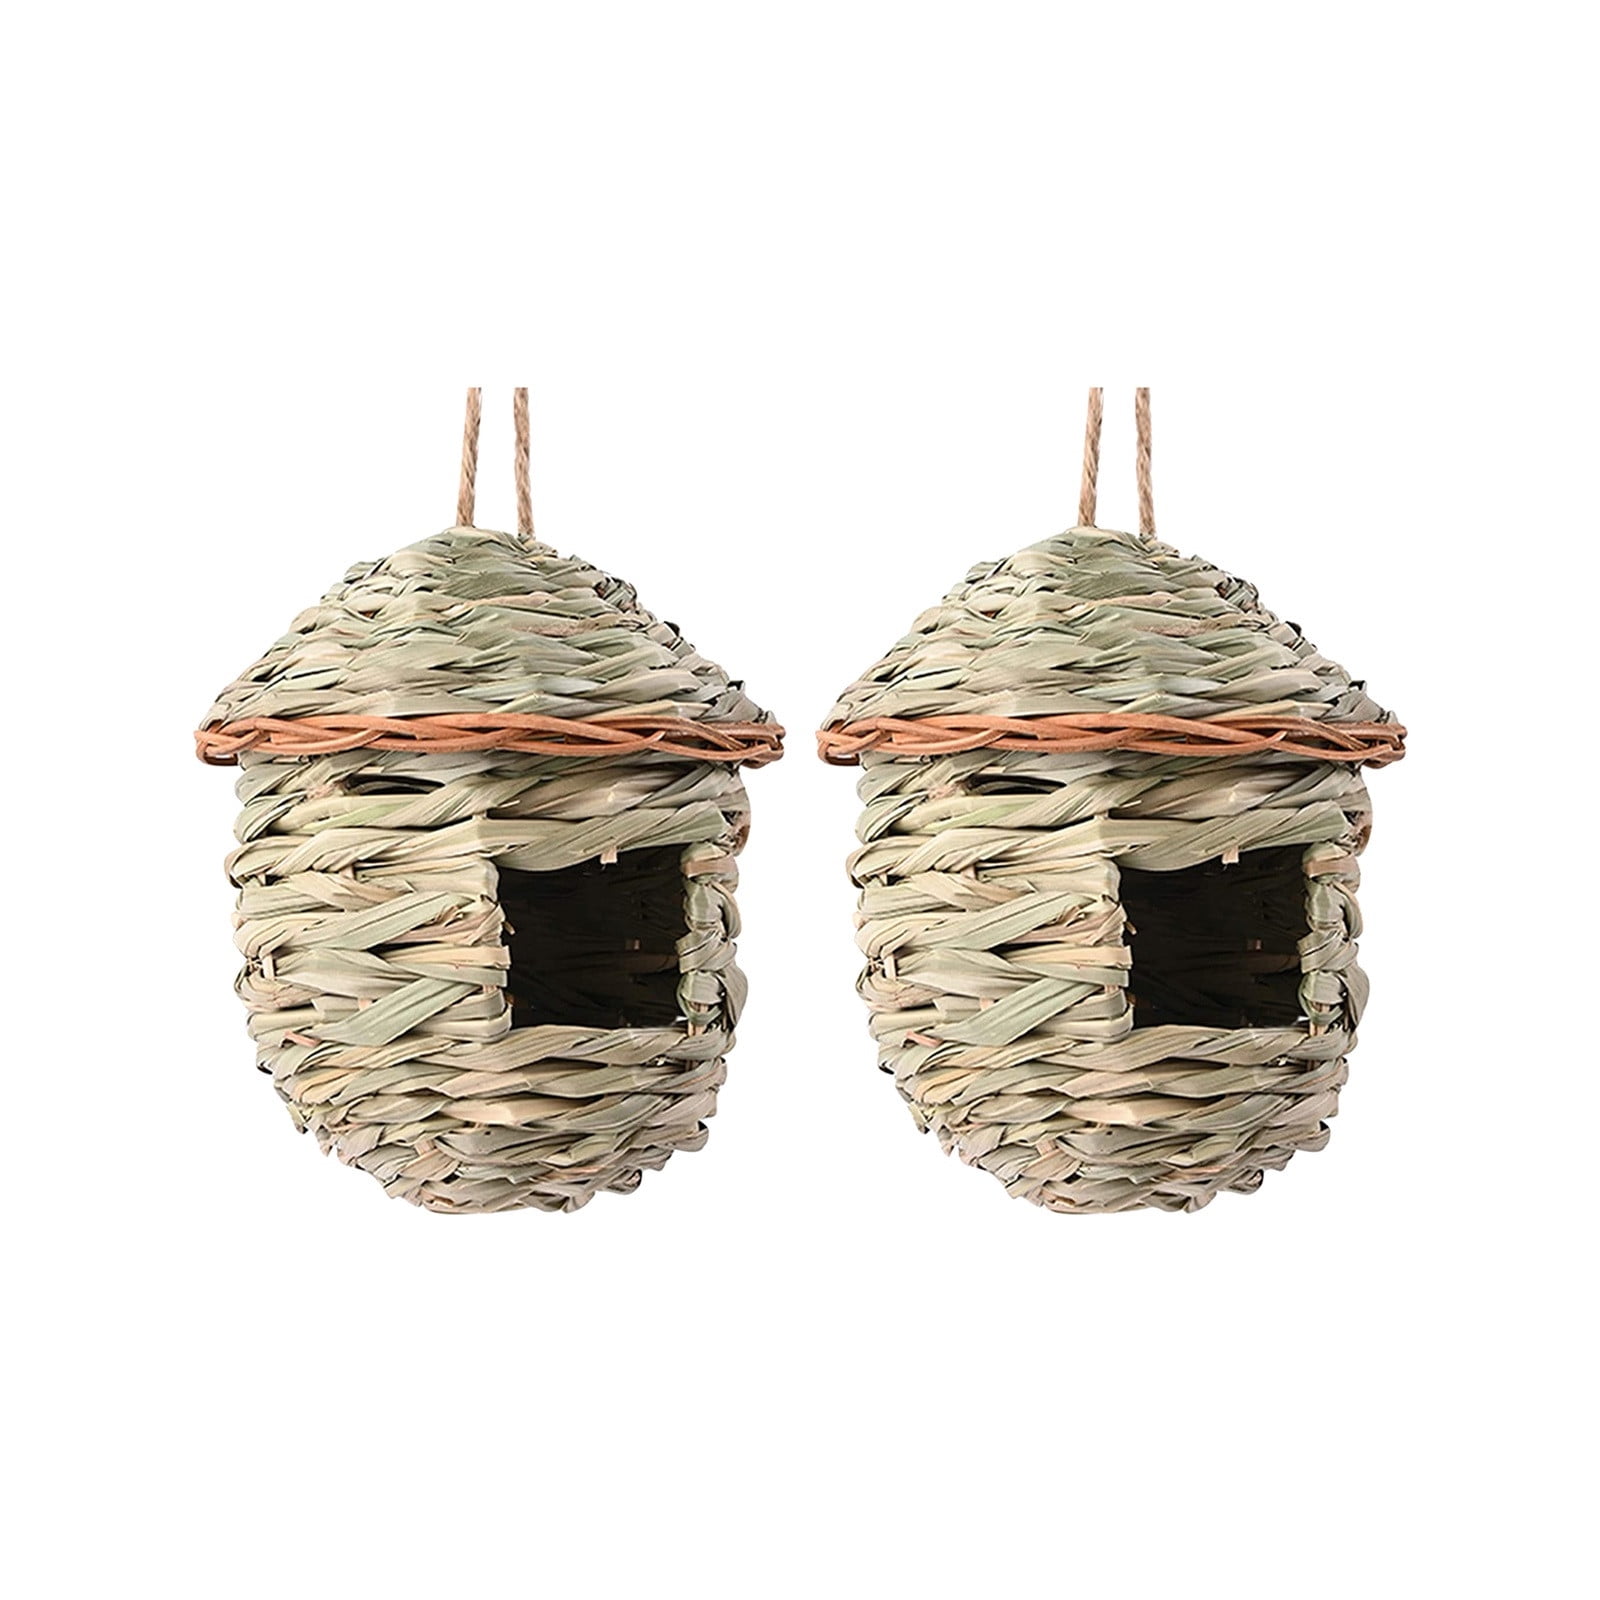 2x Bird Nest Box Wild Life Hanging Pocket House Cold Weather Rest for Birds 